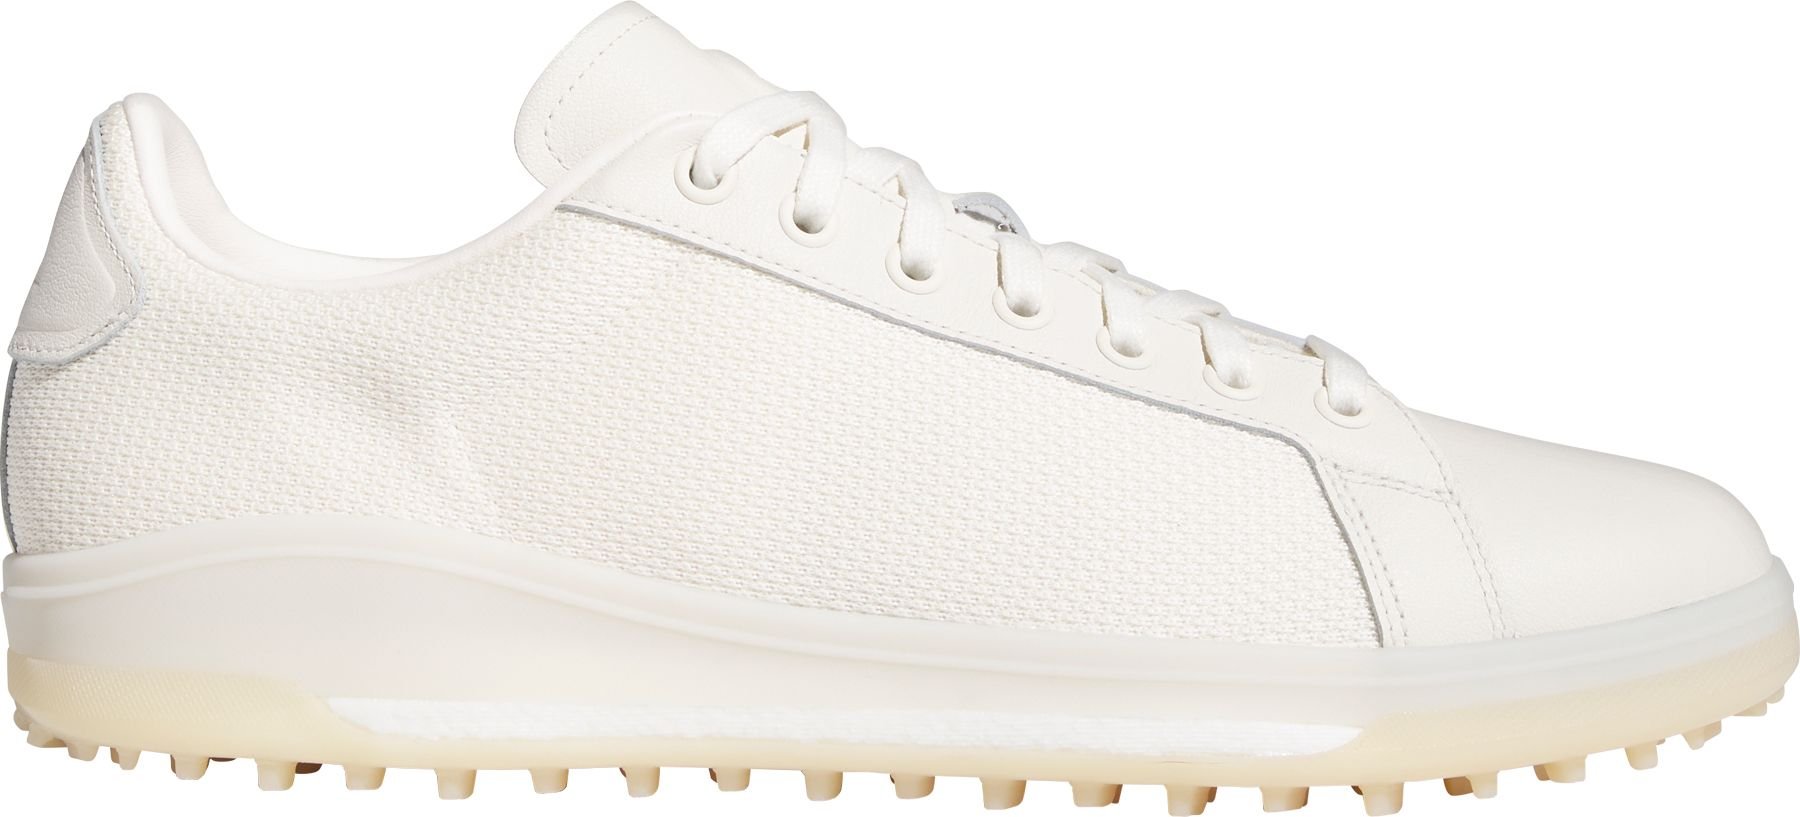 adidas Go-To Spikeless 1 Golf Shoes Chalk White/Alumina/Magic Beige -  Carl's Golfland